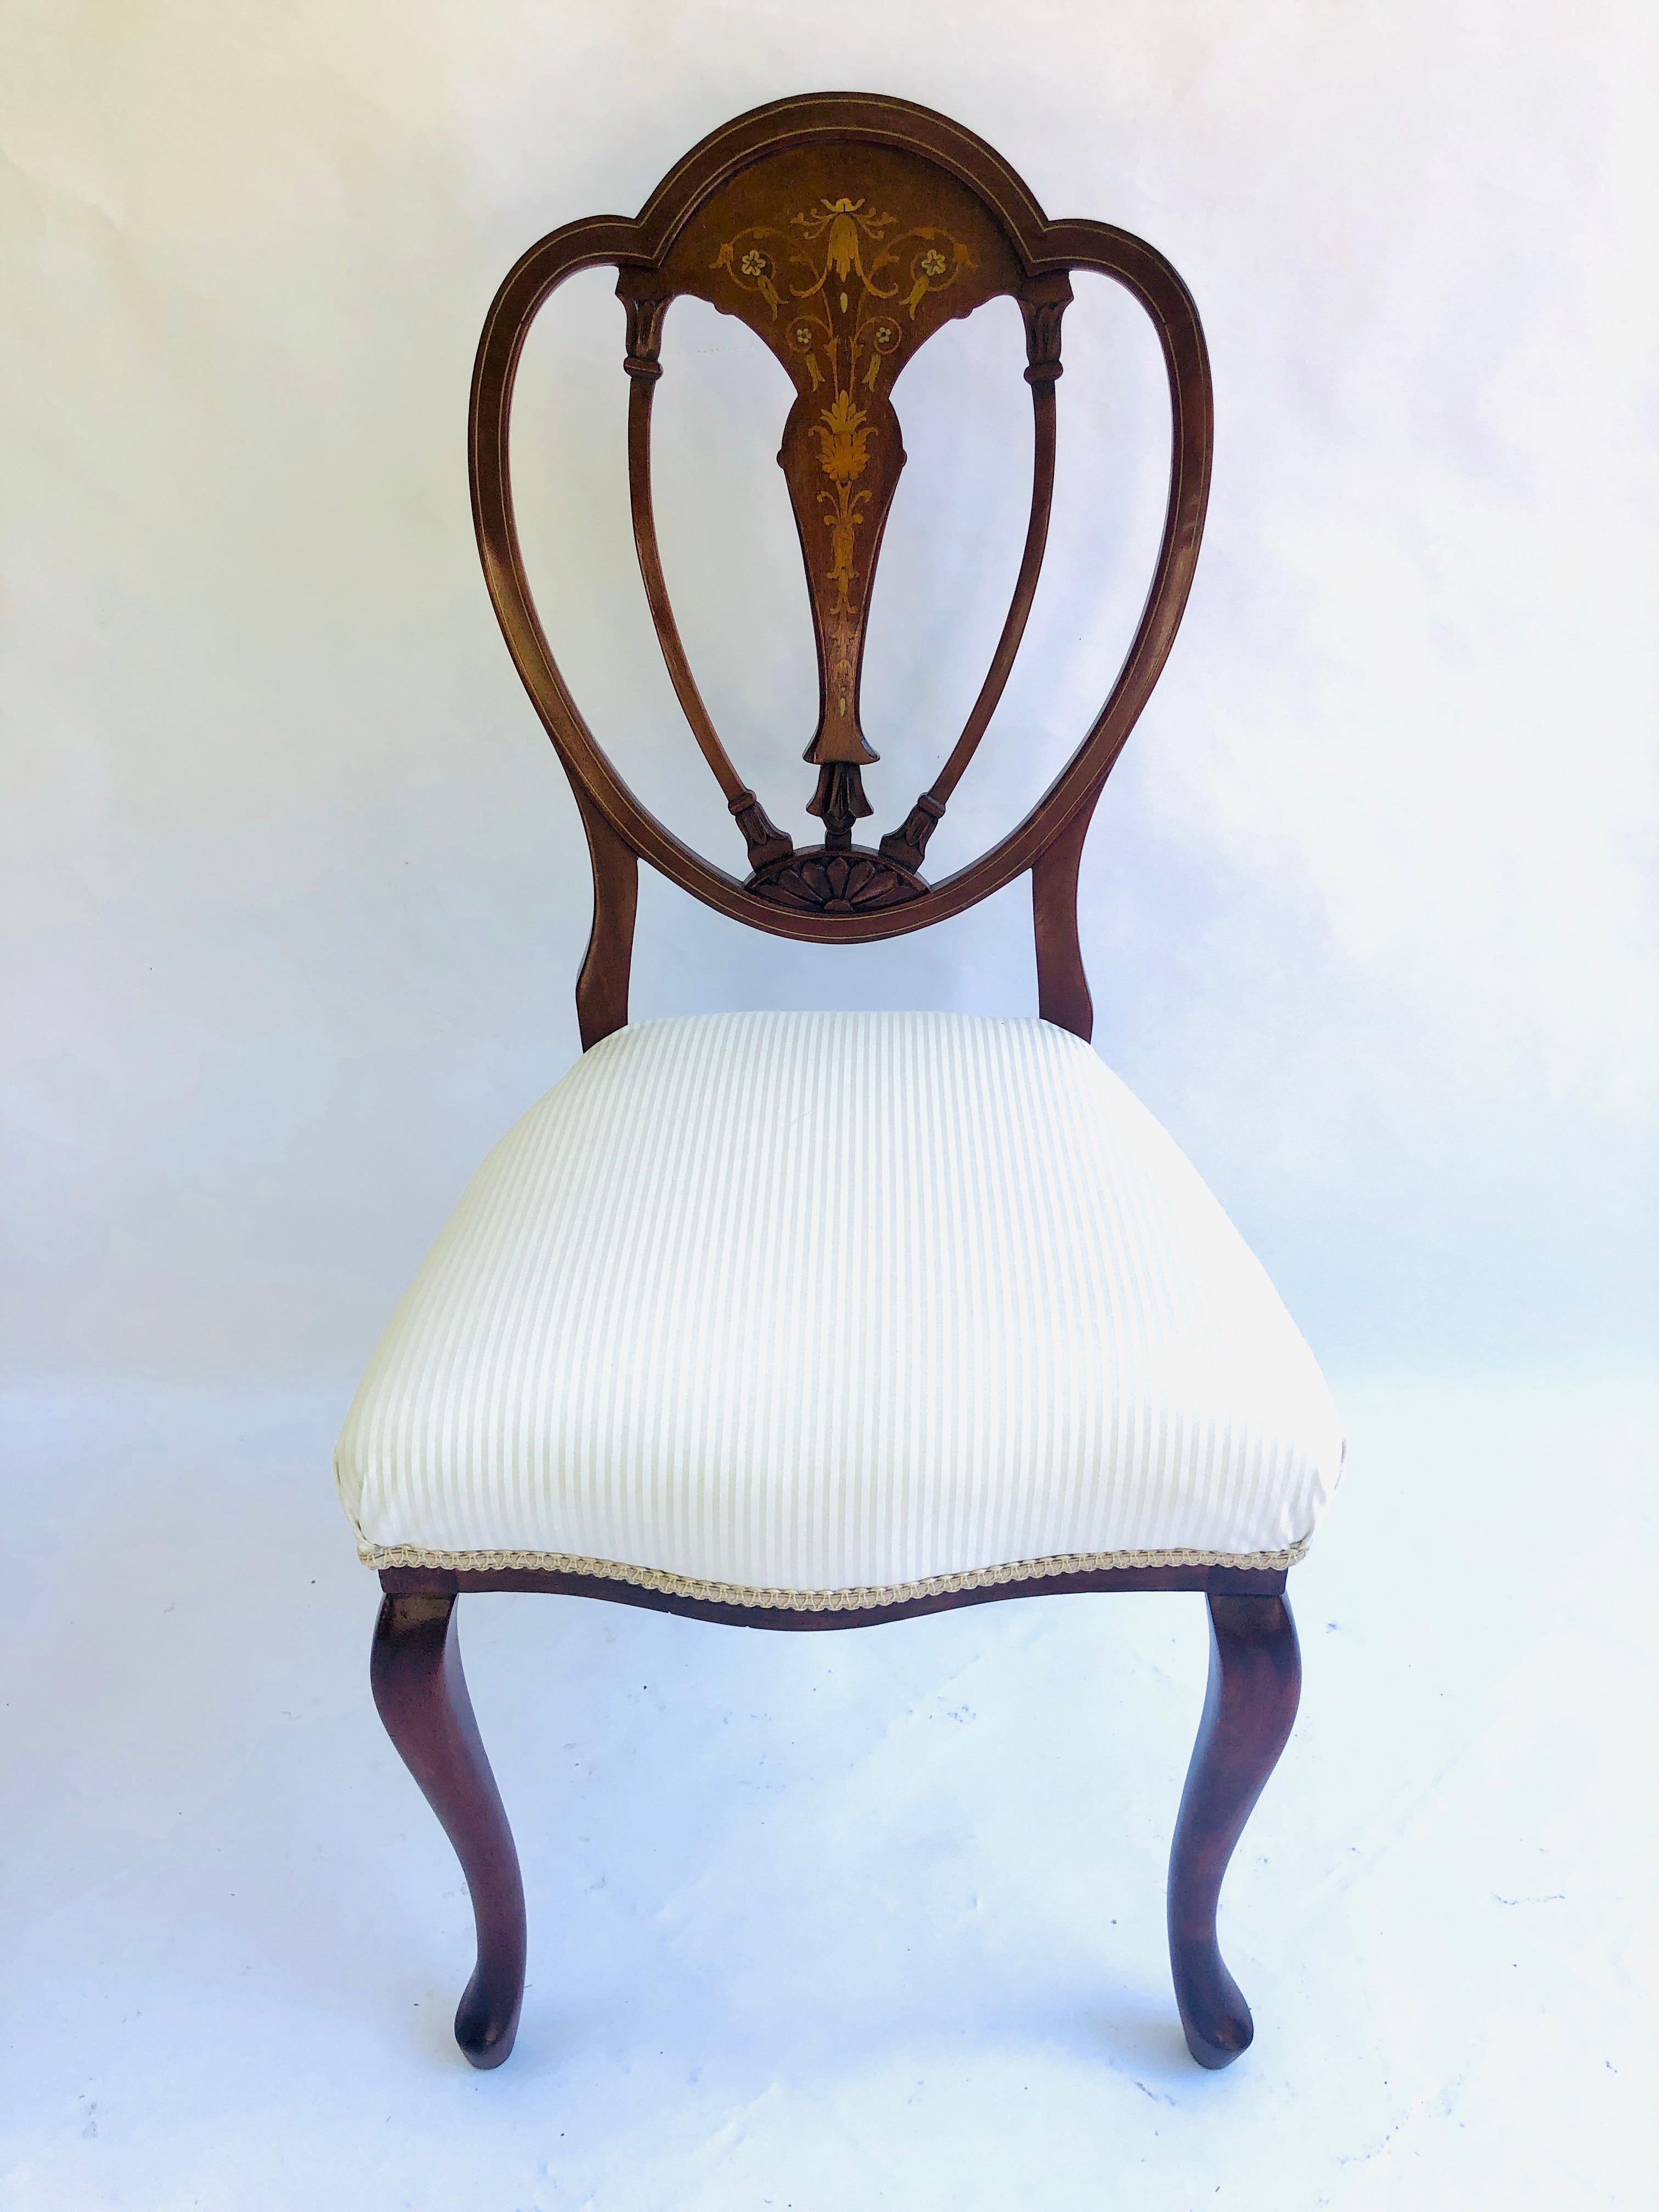 Fine quality pair of antique inlaid mahogany Victorian side chairs having an exquisite marquetry inlaid shaped back with an inlaid marquetry center splat. They have elegantly shaped cabriole front legs and out swept back legs. They have both been